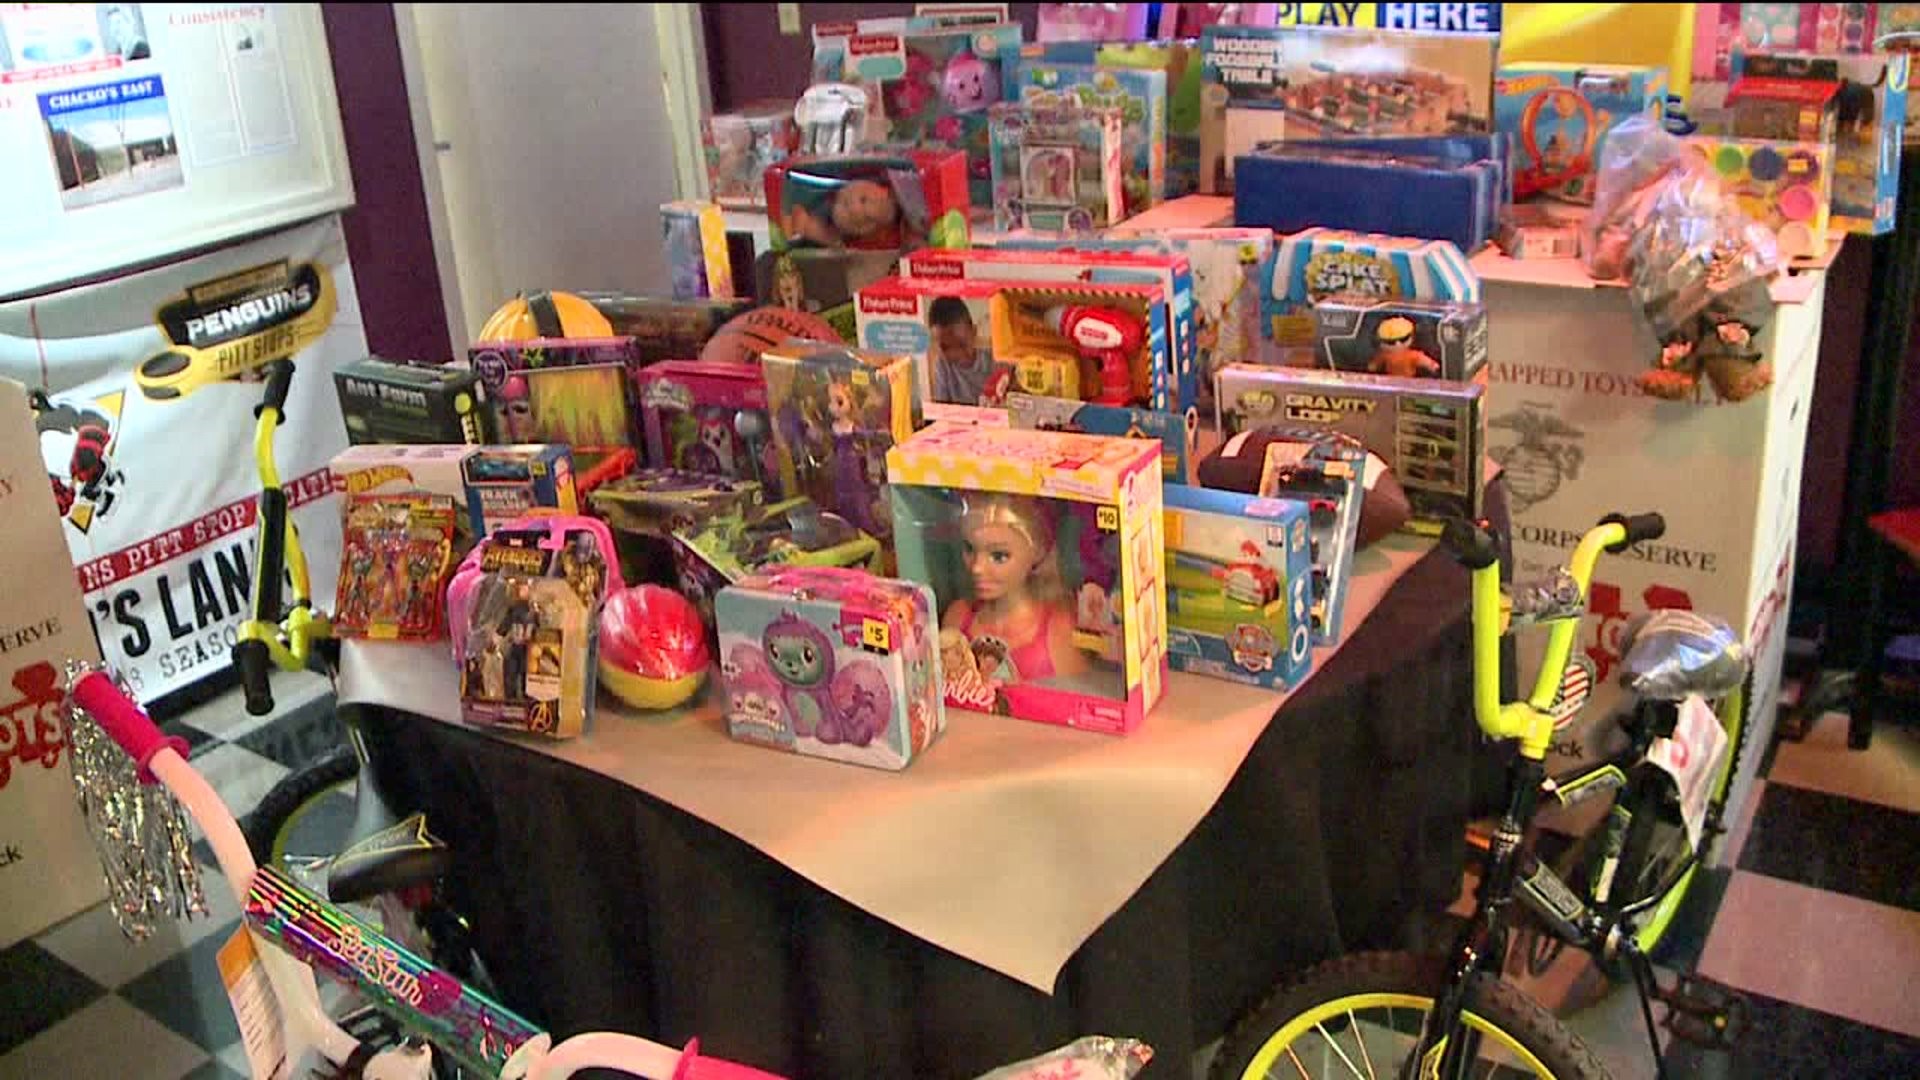 Fundraiser for Toys for Tots in Wilkes-Barre